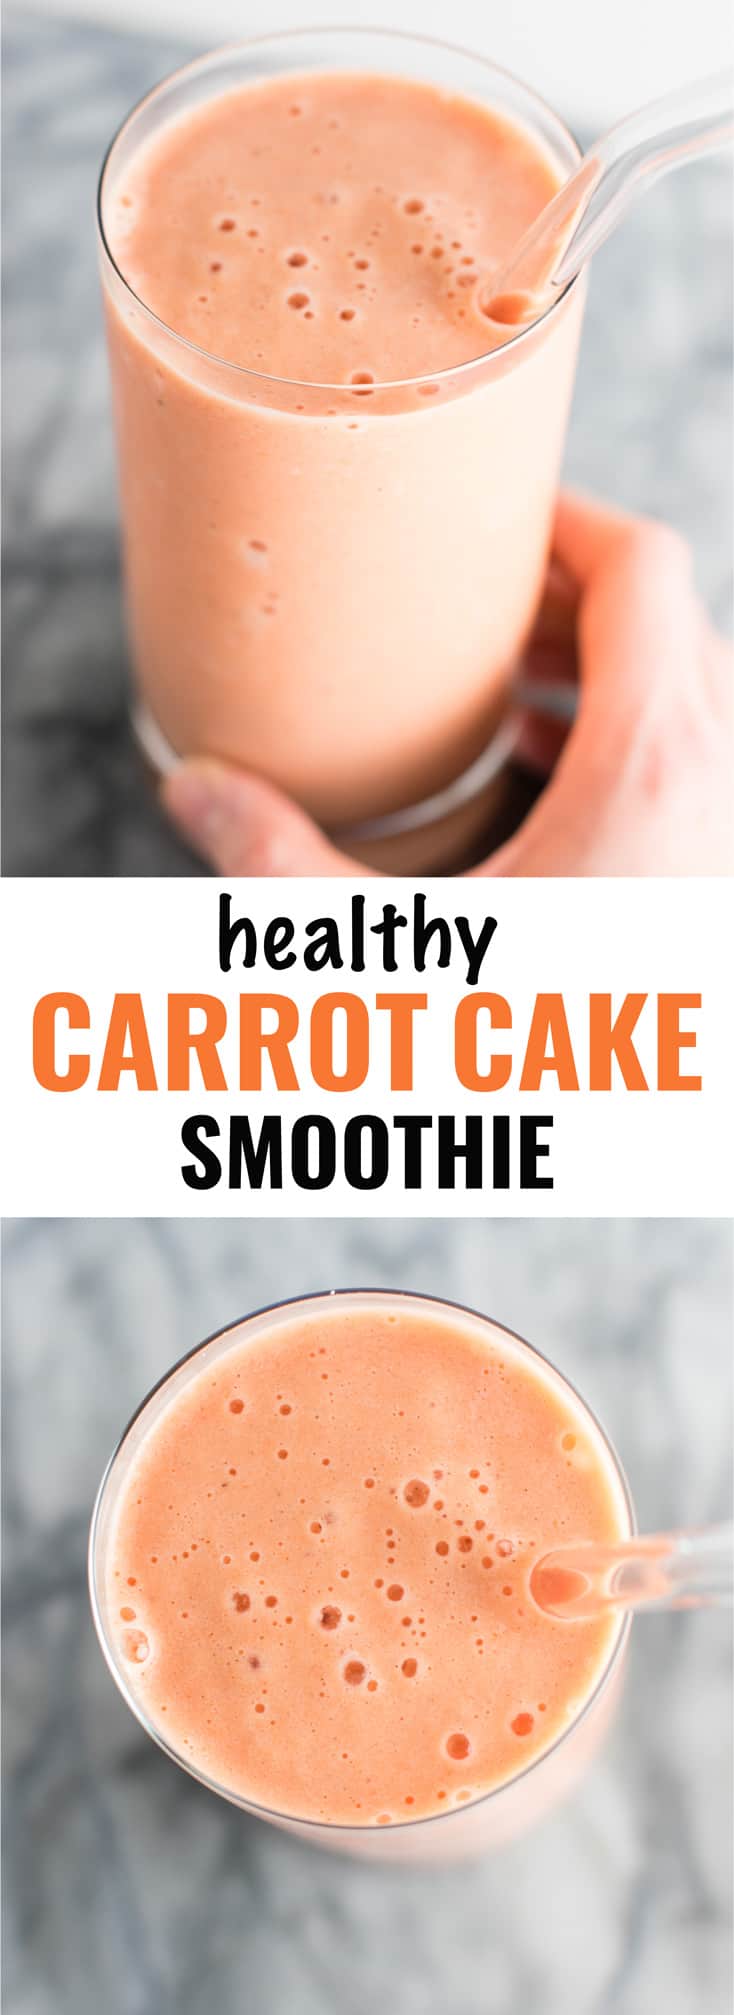 image with text "healthy carrot cake smoothie"